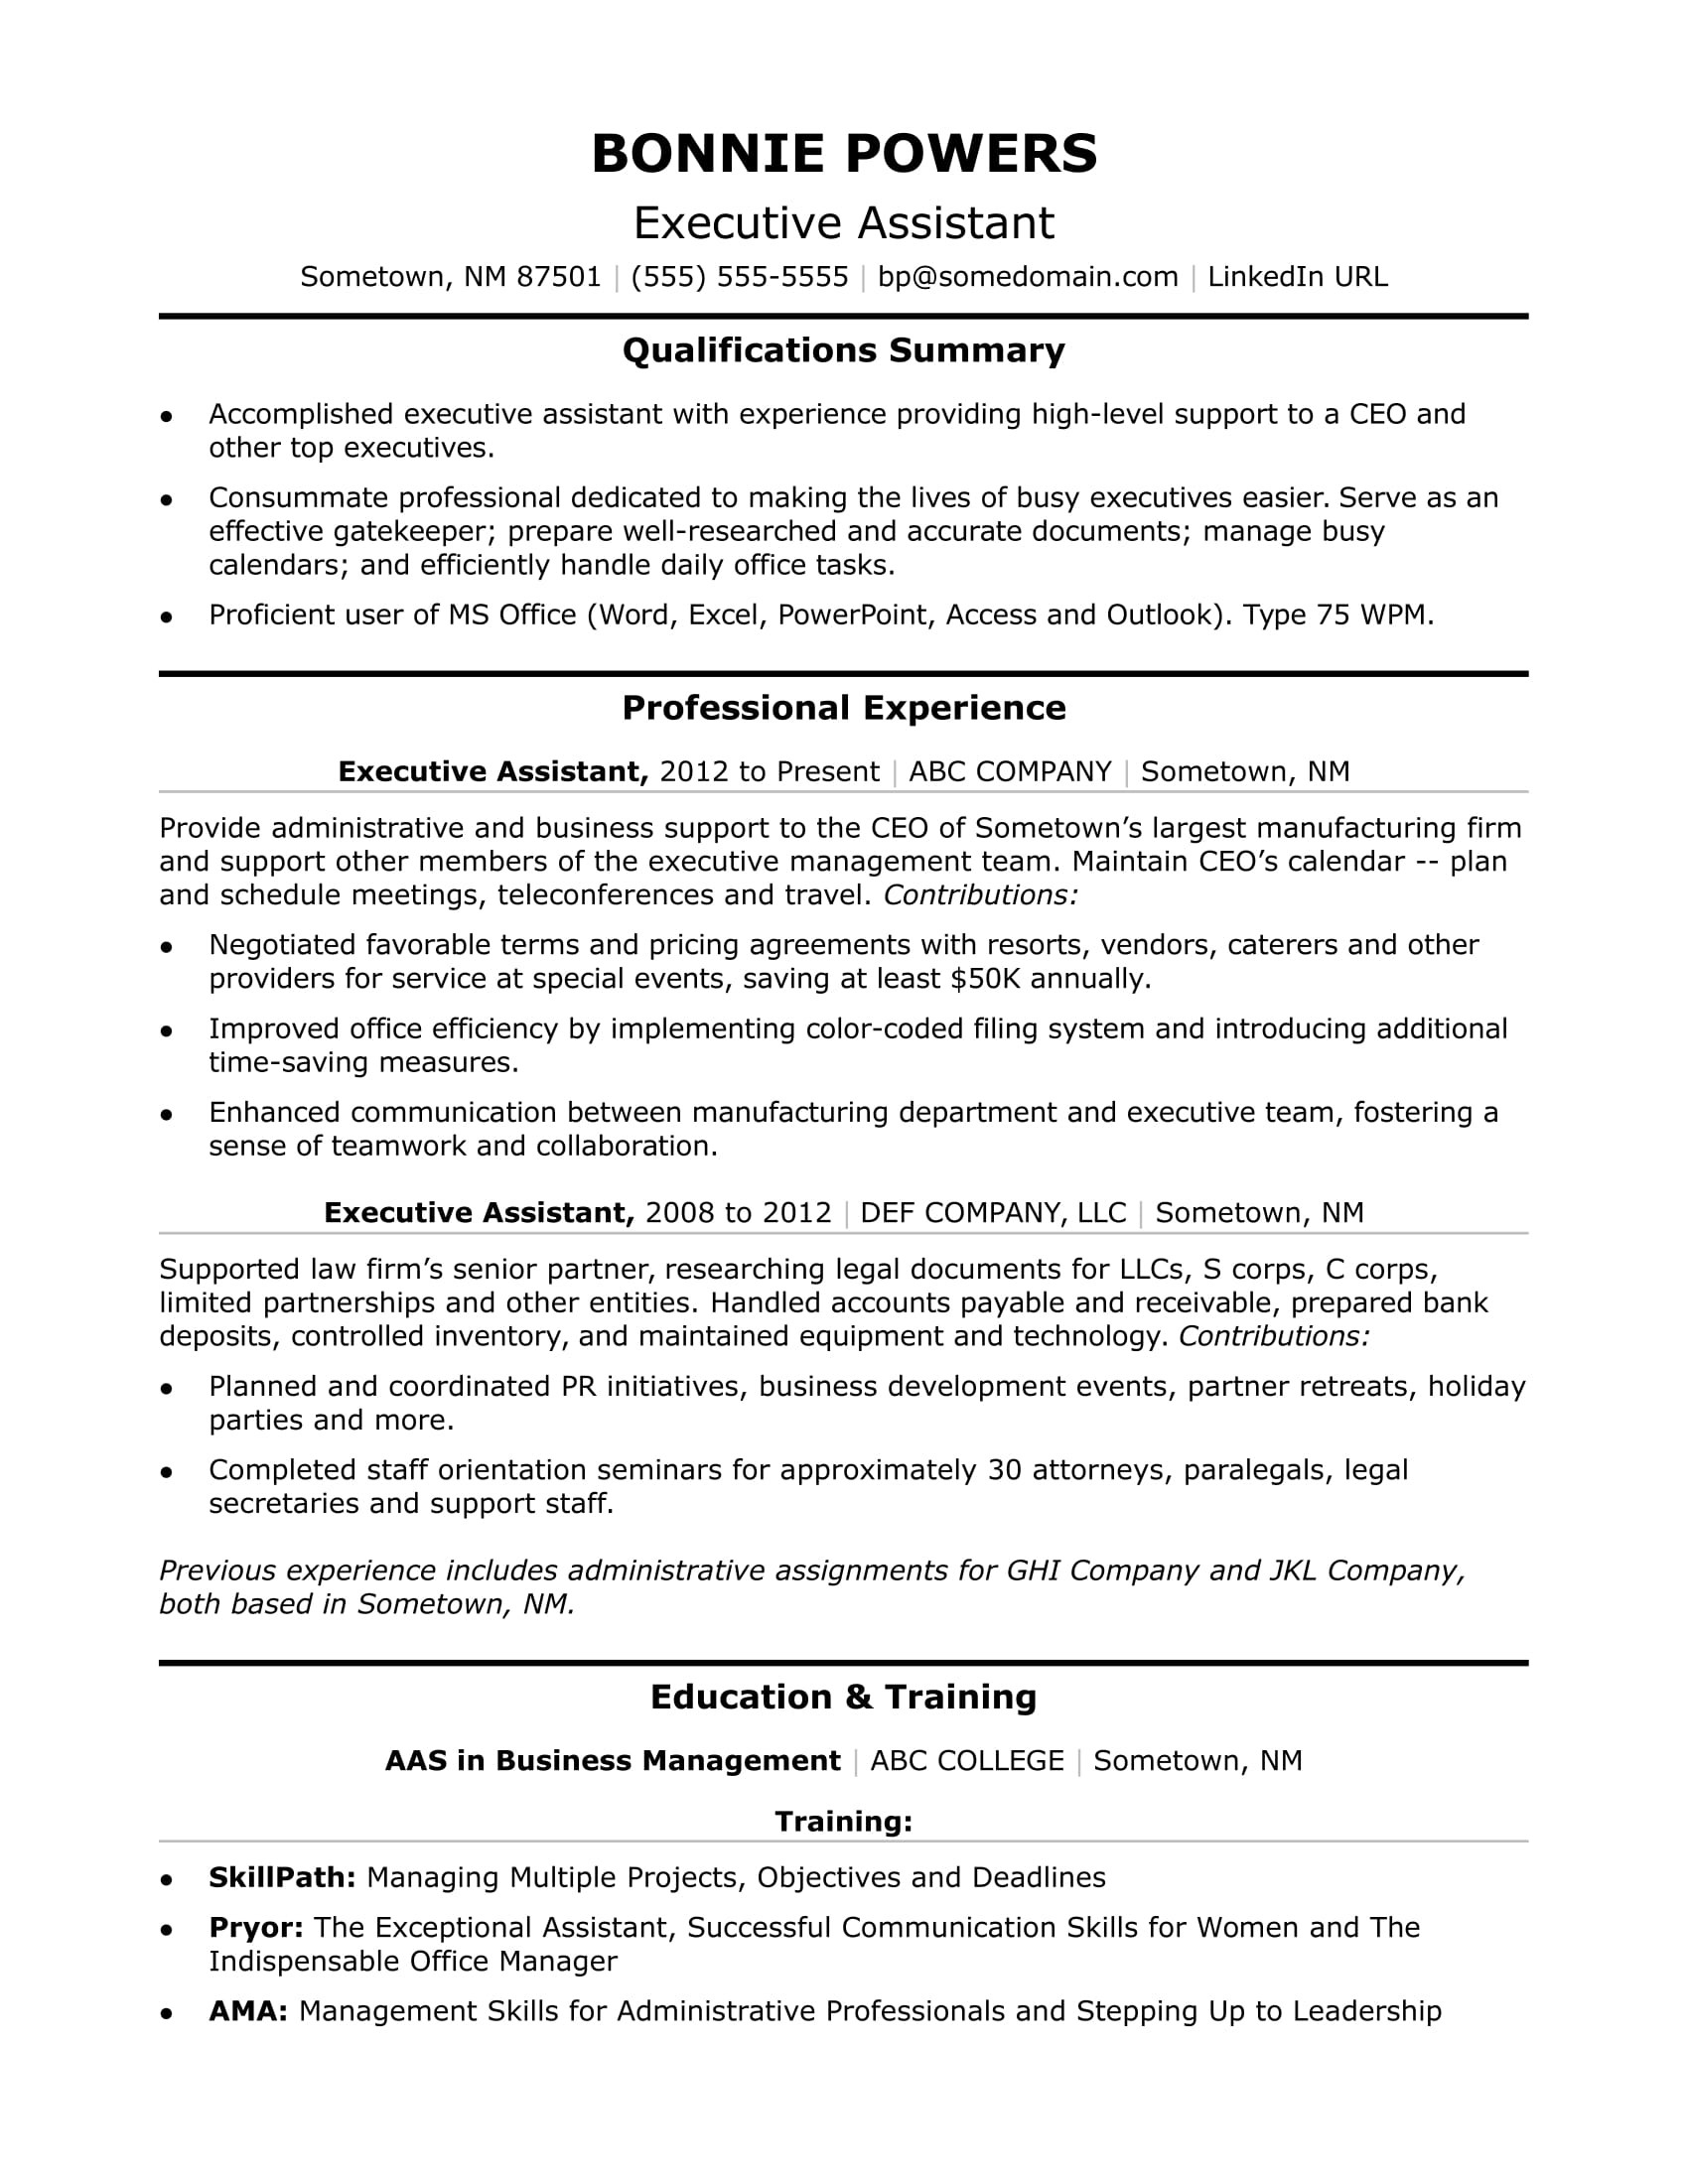 Sample Resume for Executive assistant to Director Executive assistant Resume Monster.com